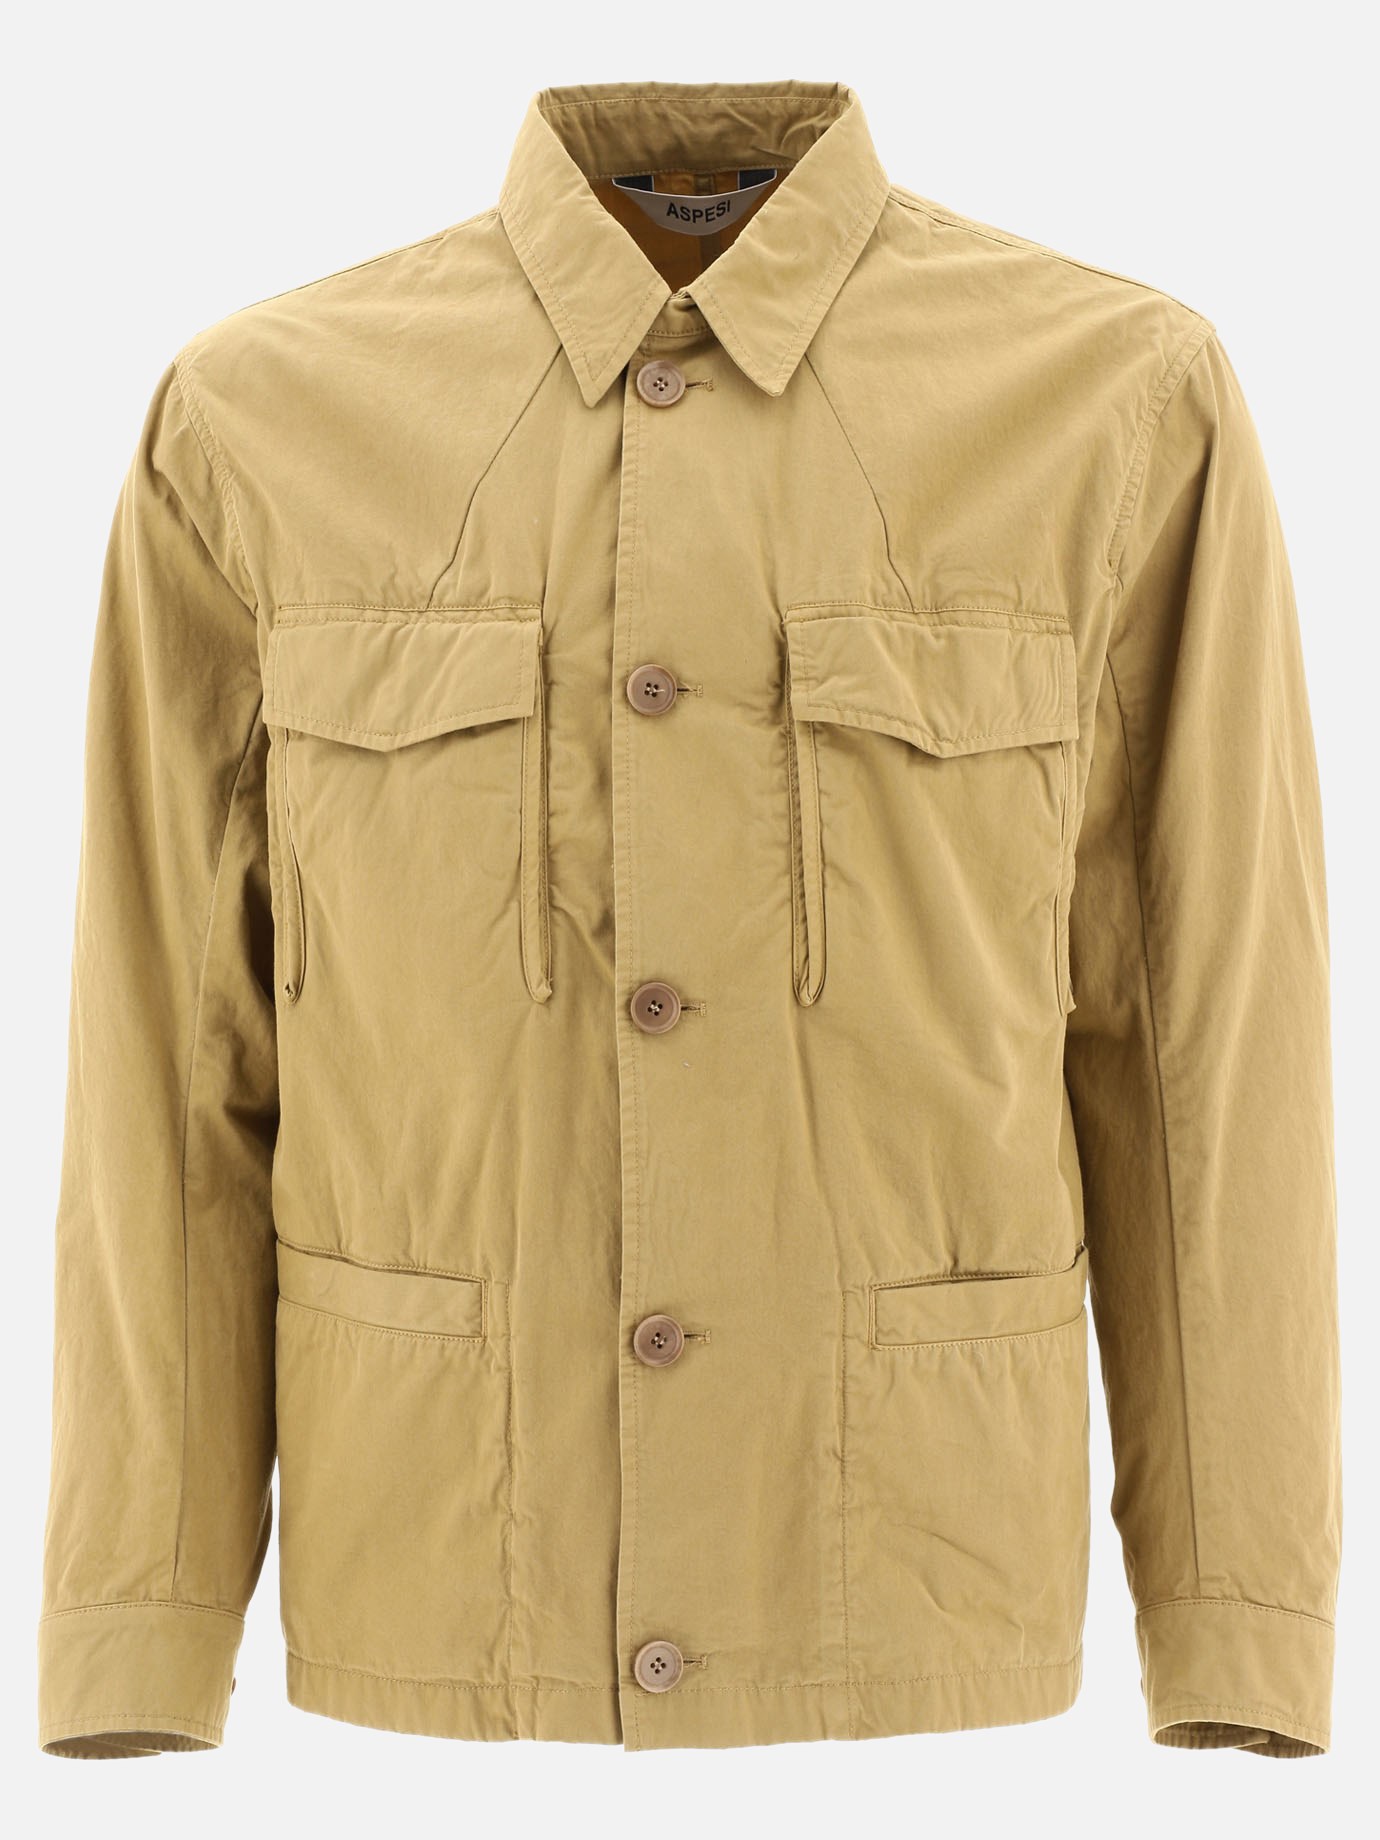 Overshirt with buttons by Aspesi